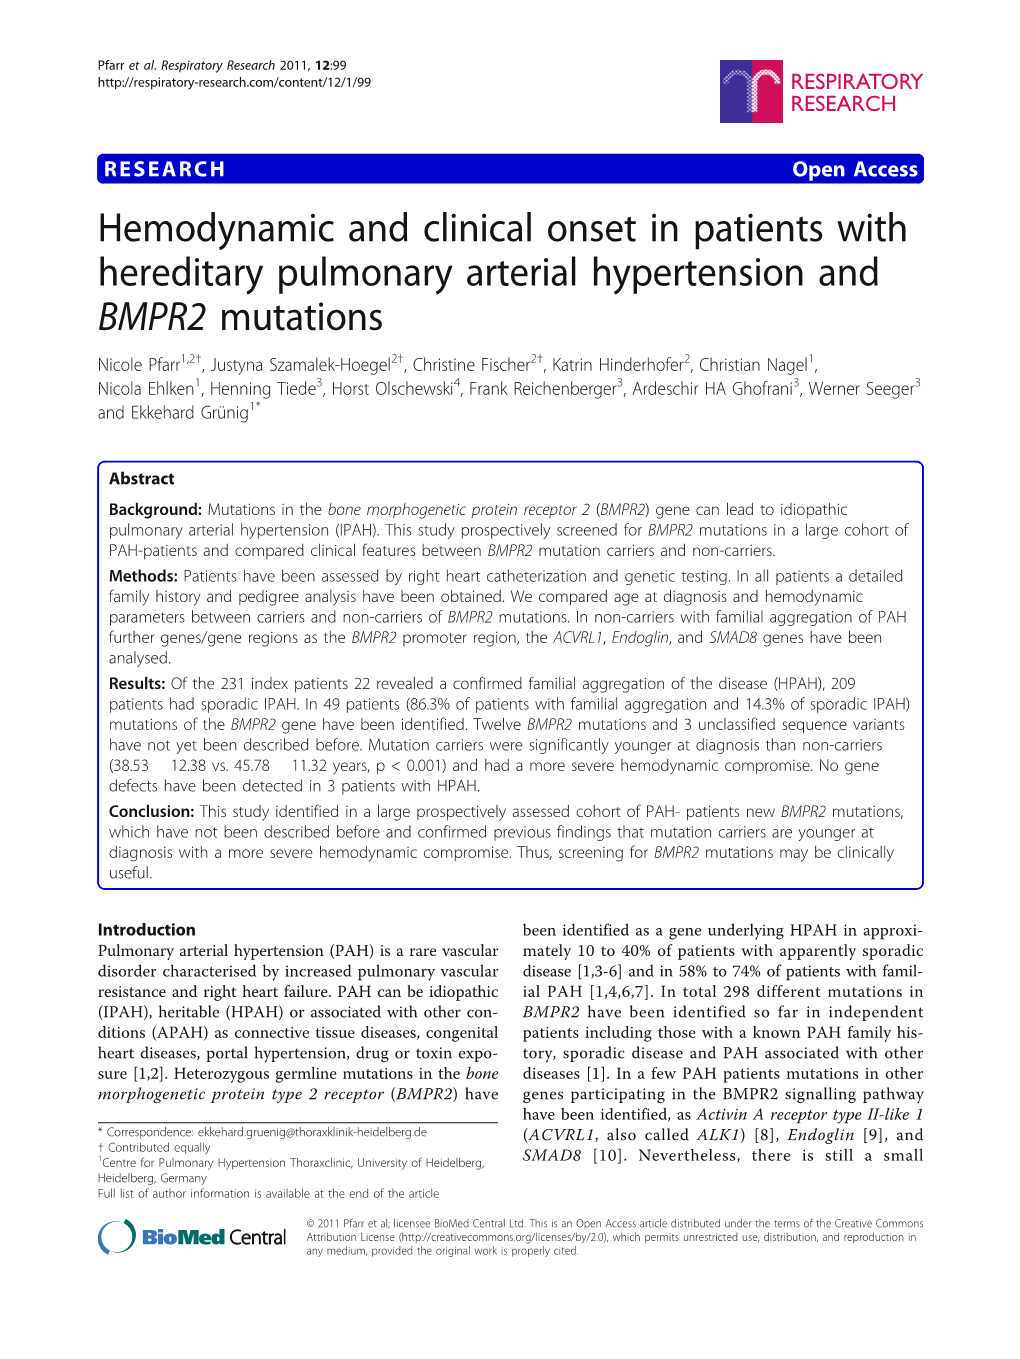 Hemodynamic and Clinical Onset in Patients with Hereditary Pulmonary